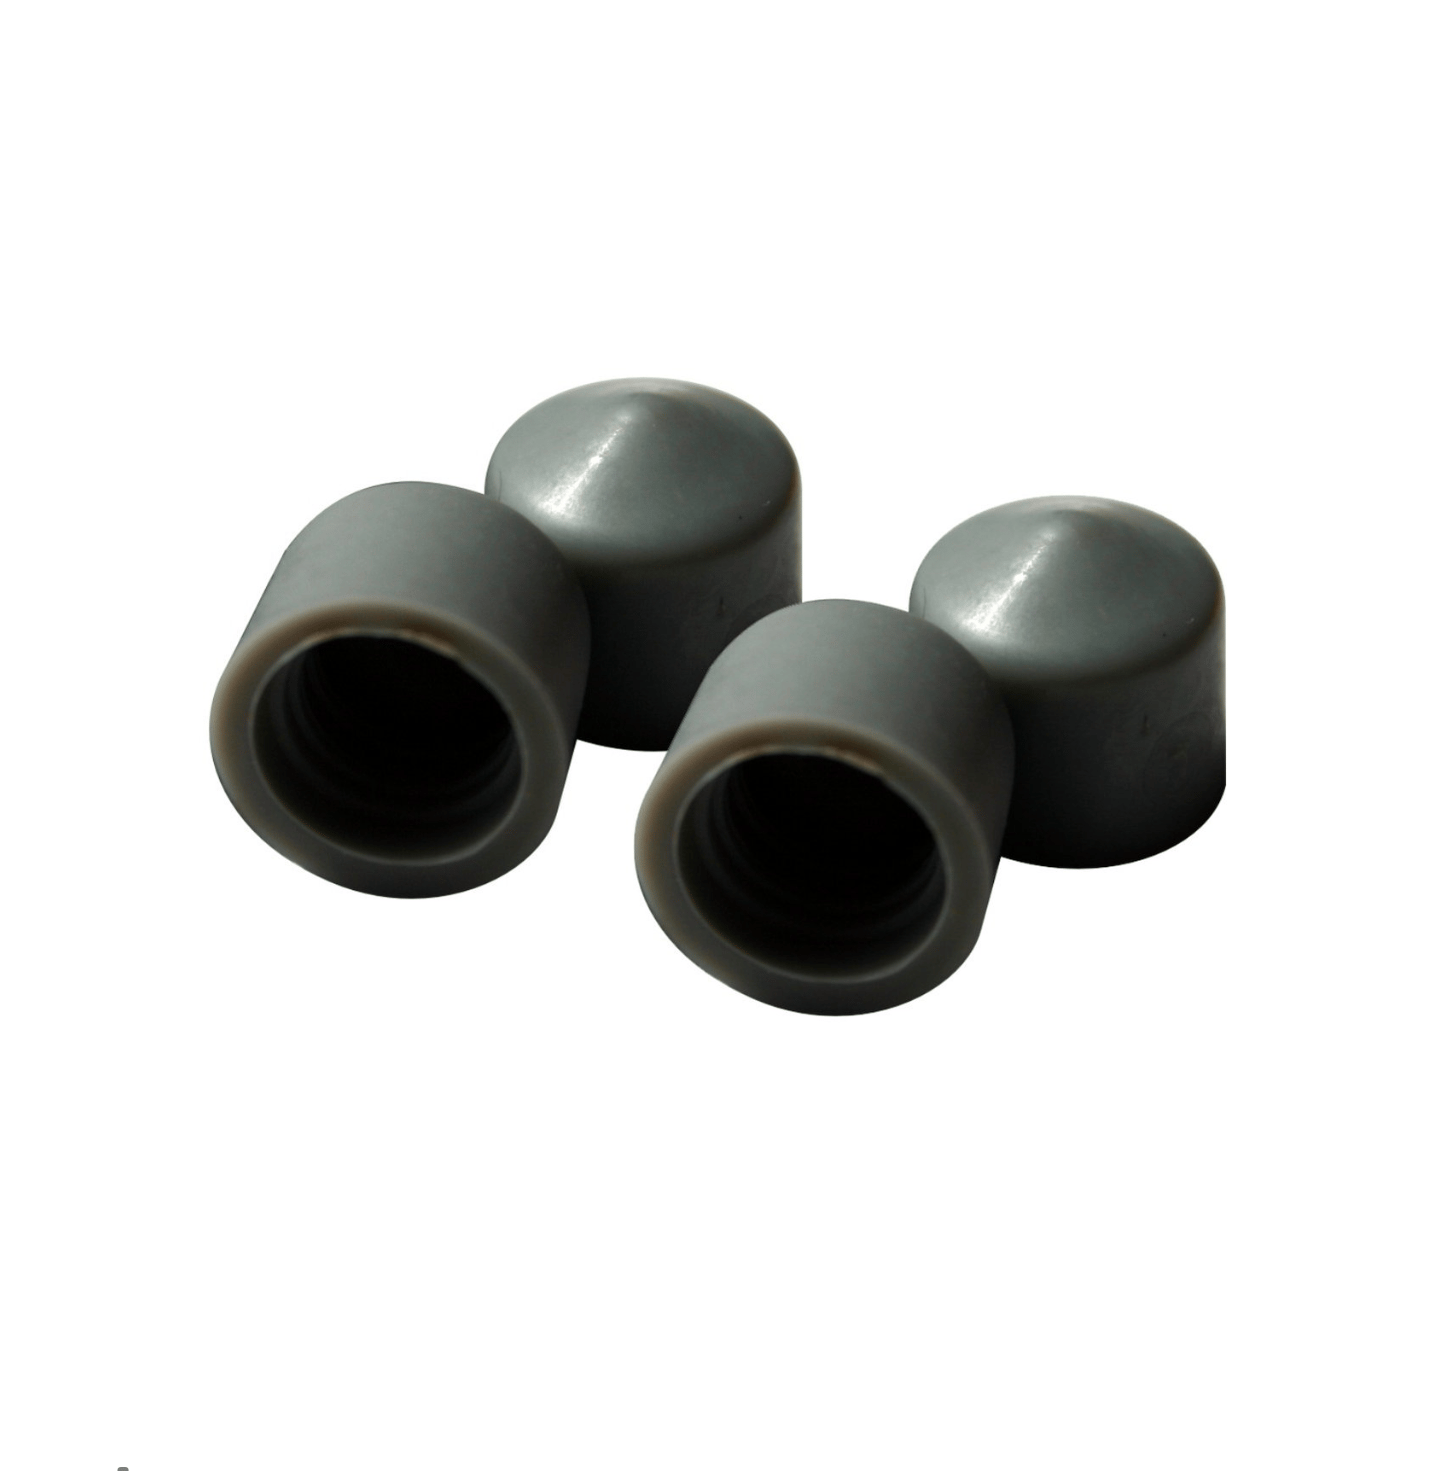 Image of Pivot Cups for ATS Mountainboard Trucks and RKP Longboard Trucks (4)